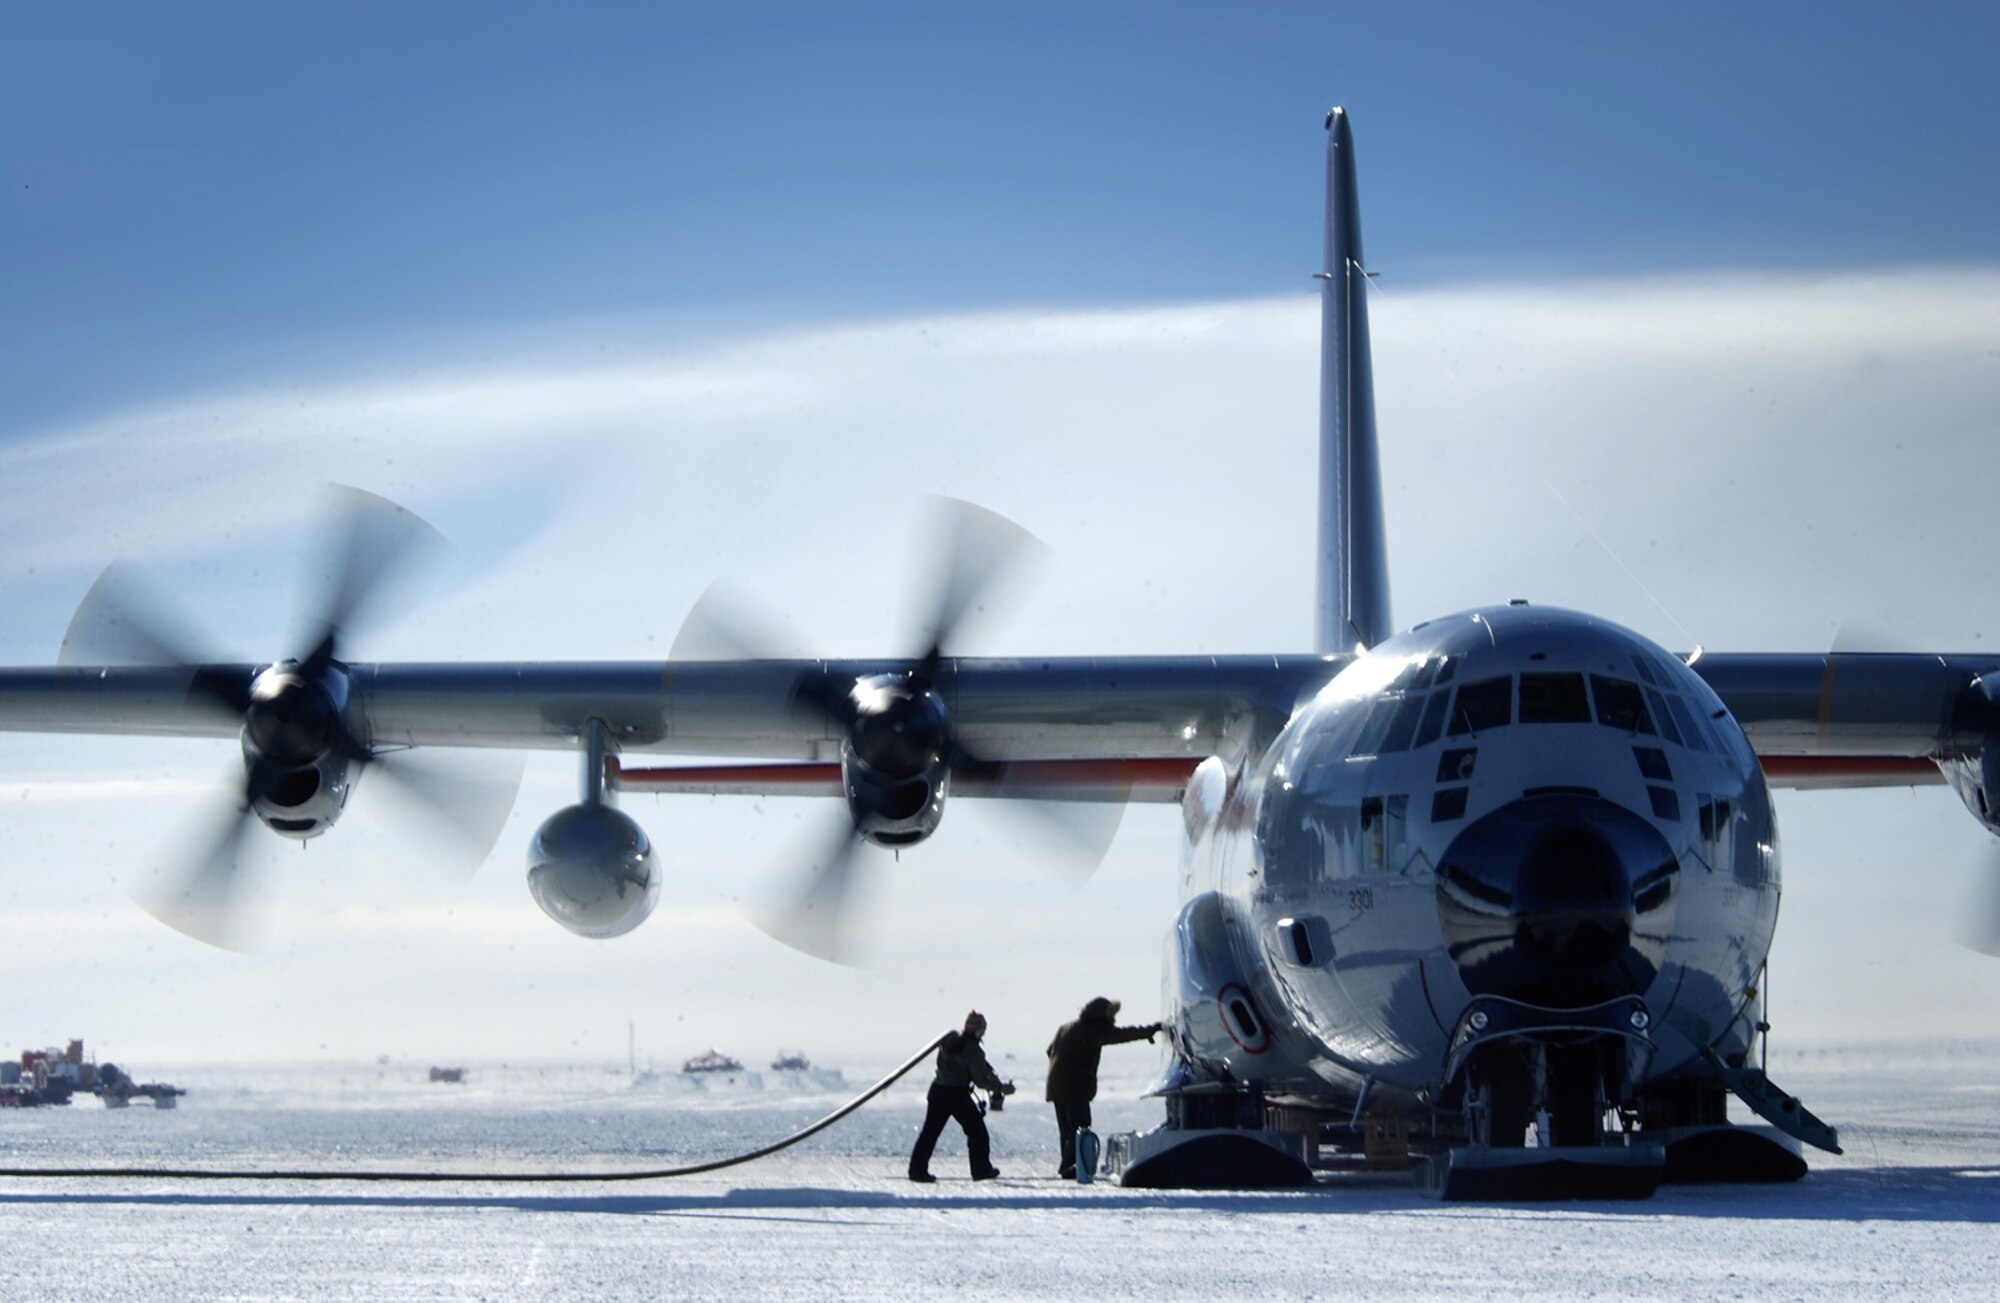 A New York Air National Guard LC-130 Hercules sits while crews unload fuel and cargo during a mission to Antartica in 2005. Ski-equipped LC-130s and C-17 Globemaster IIIs redeployed from Christchurch, New Zealand, like the one pictured supported the 2006-2007 season of Operation Deep Freeze which ended in late February. This unique joint and total force mission has supported the National Science Foundation and U.S. Antarctic Program since 1955 and is currently led by Pacific Air Forces, 13th Air Force. The LC-130 is equipped with ski-landing gear that allows the aircraft to land on ice or snow while airlifting supplies to remote locations throughout the Antarctic continent.  (U.S. Air Force photo/Master Sgt. Efrain Gonzalez)